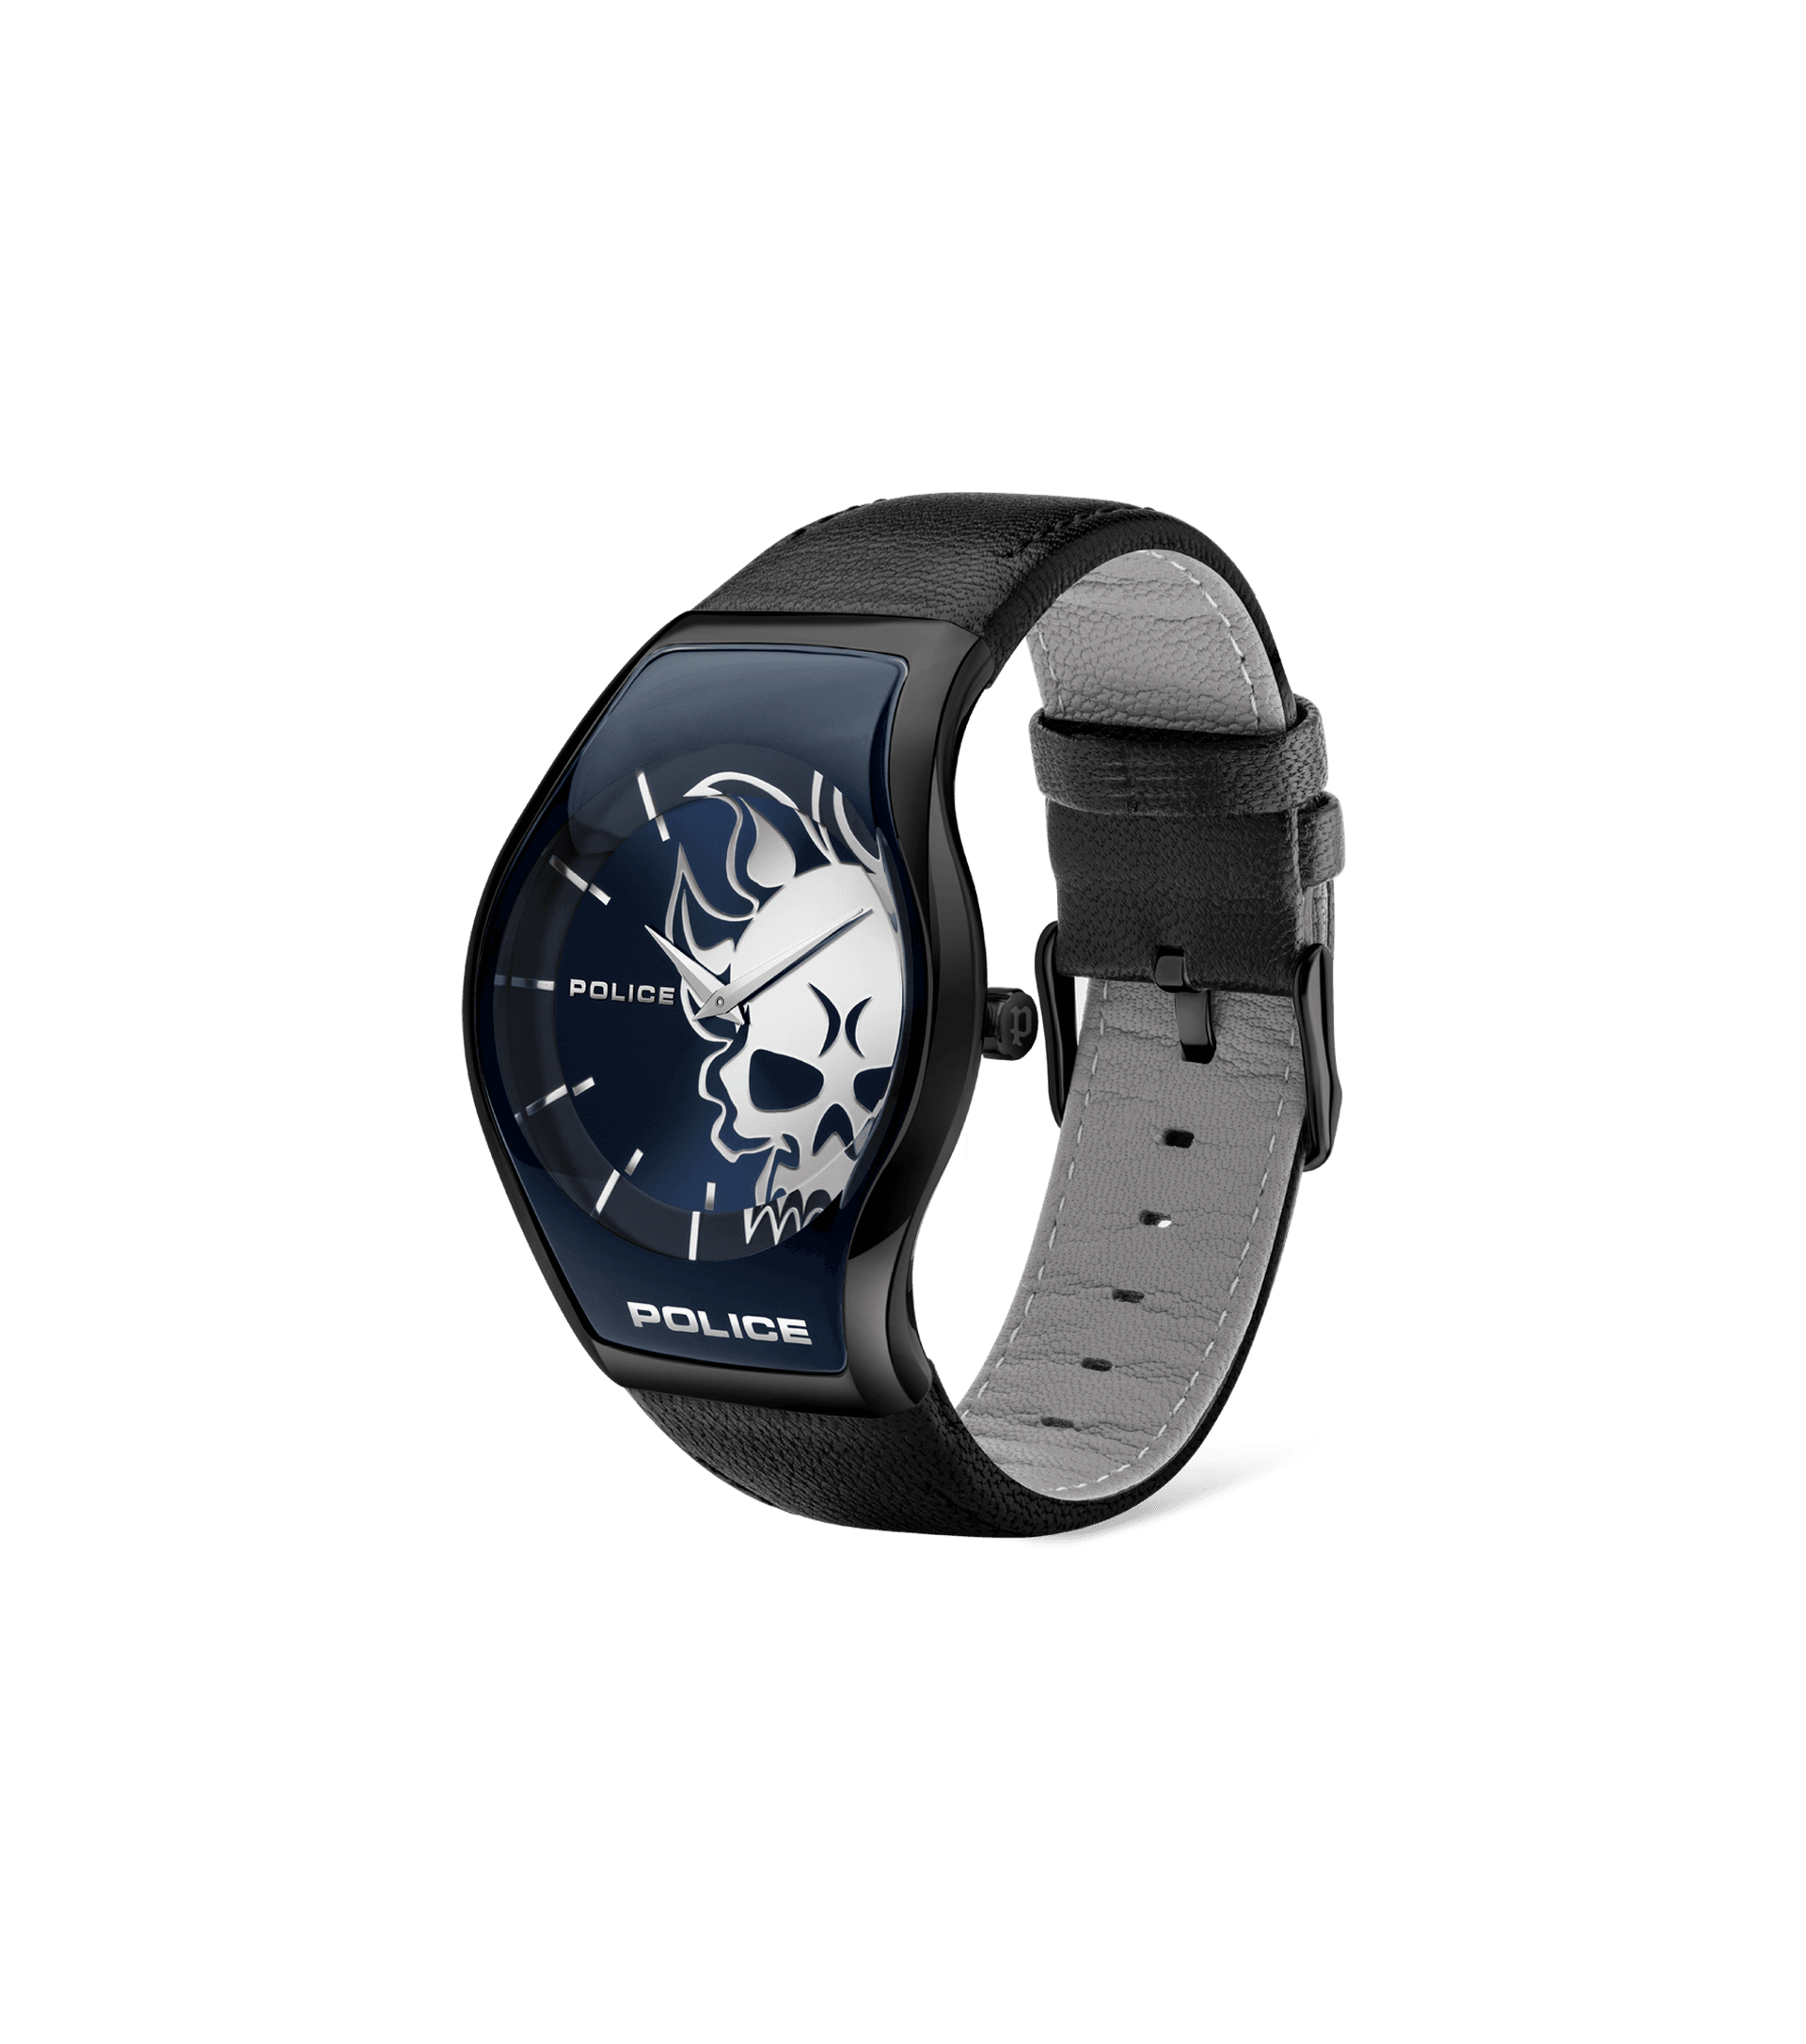 Police watches - Sphere Watch By Police For Men Black, Grey